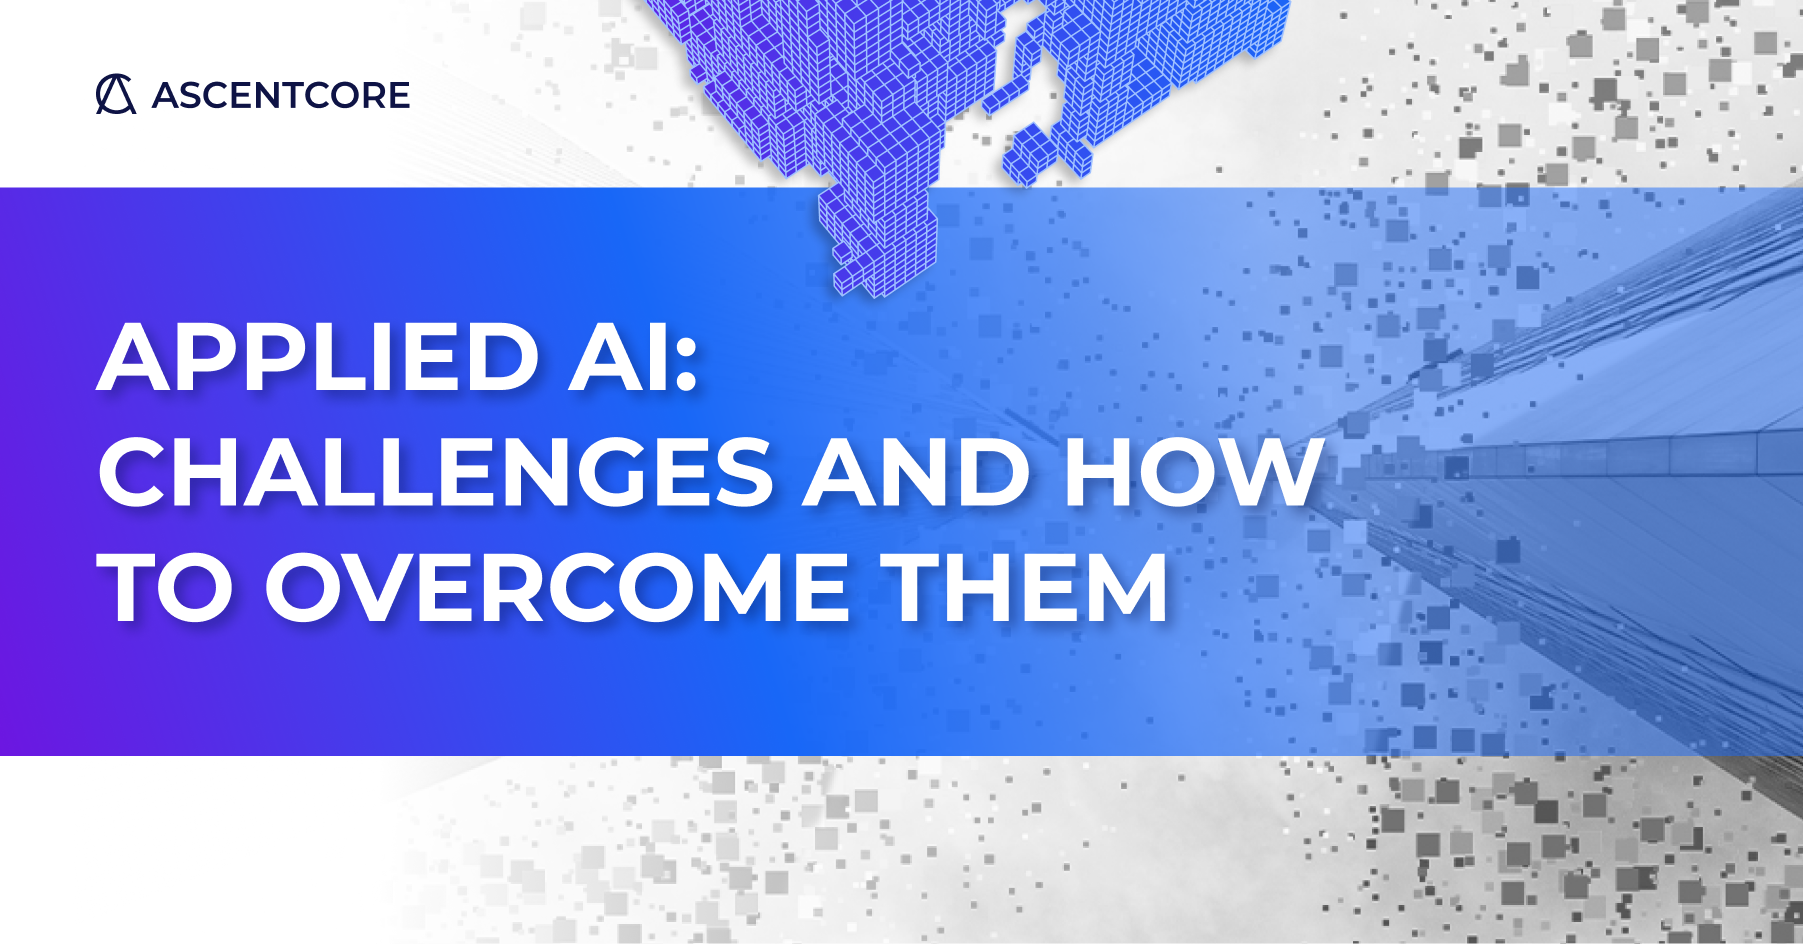 Applied Ai: Challenges and how to overcome them blogpost cover